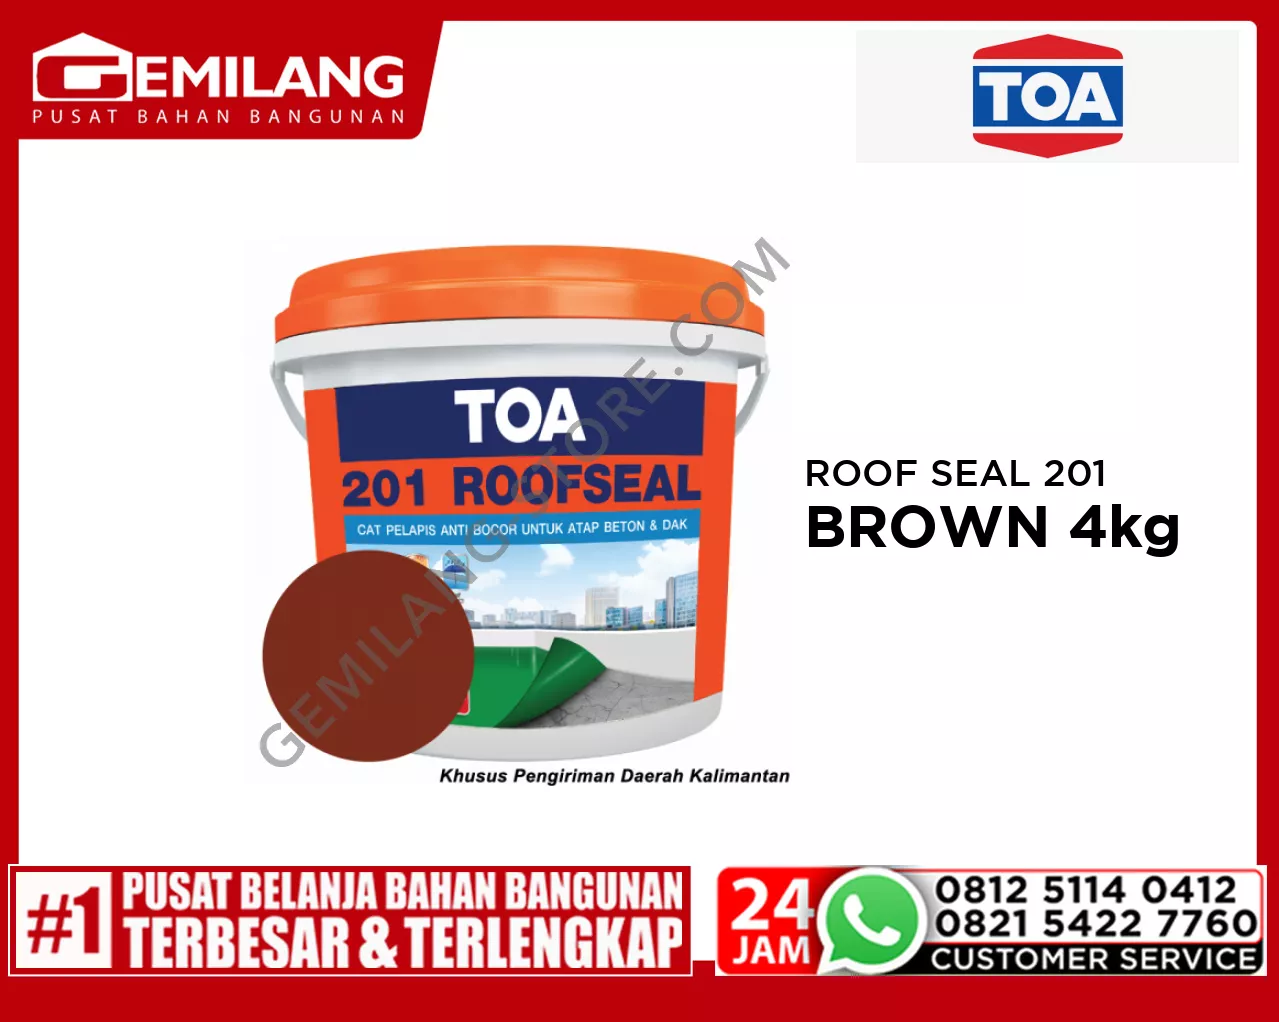 TOA ROOF SEAL 201 BROWN  4kg